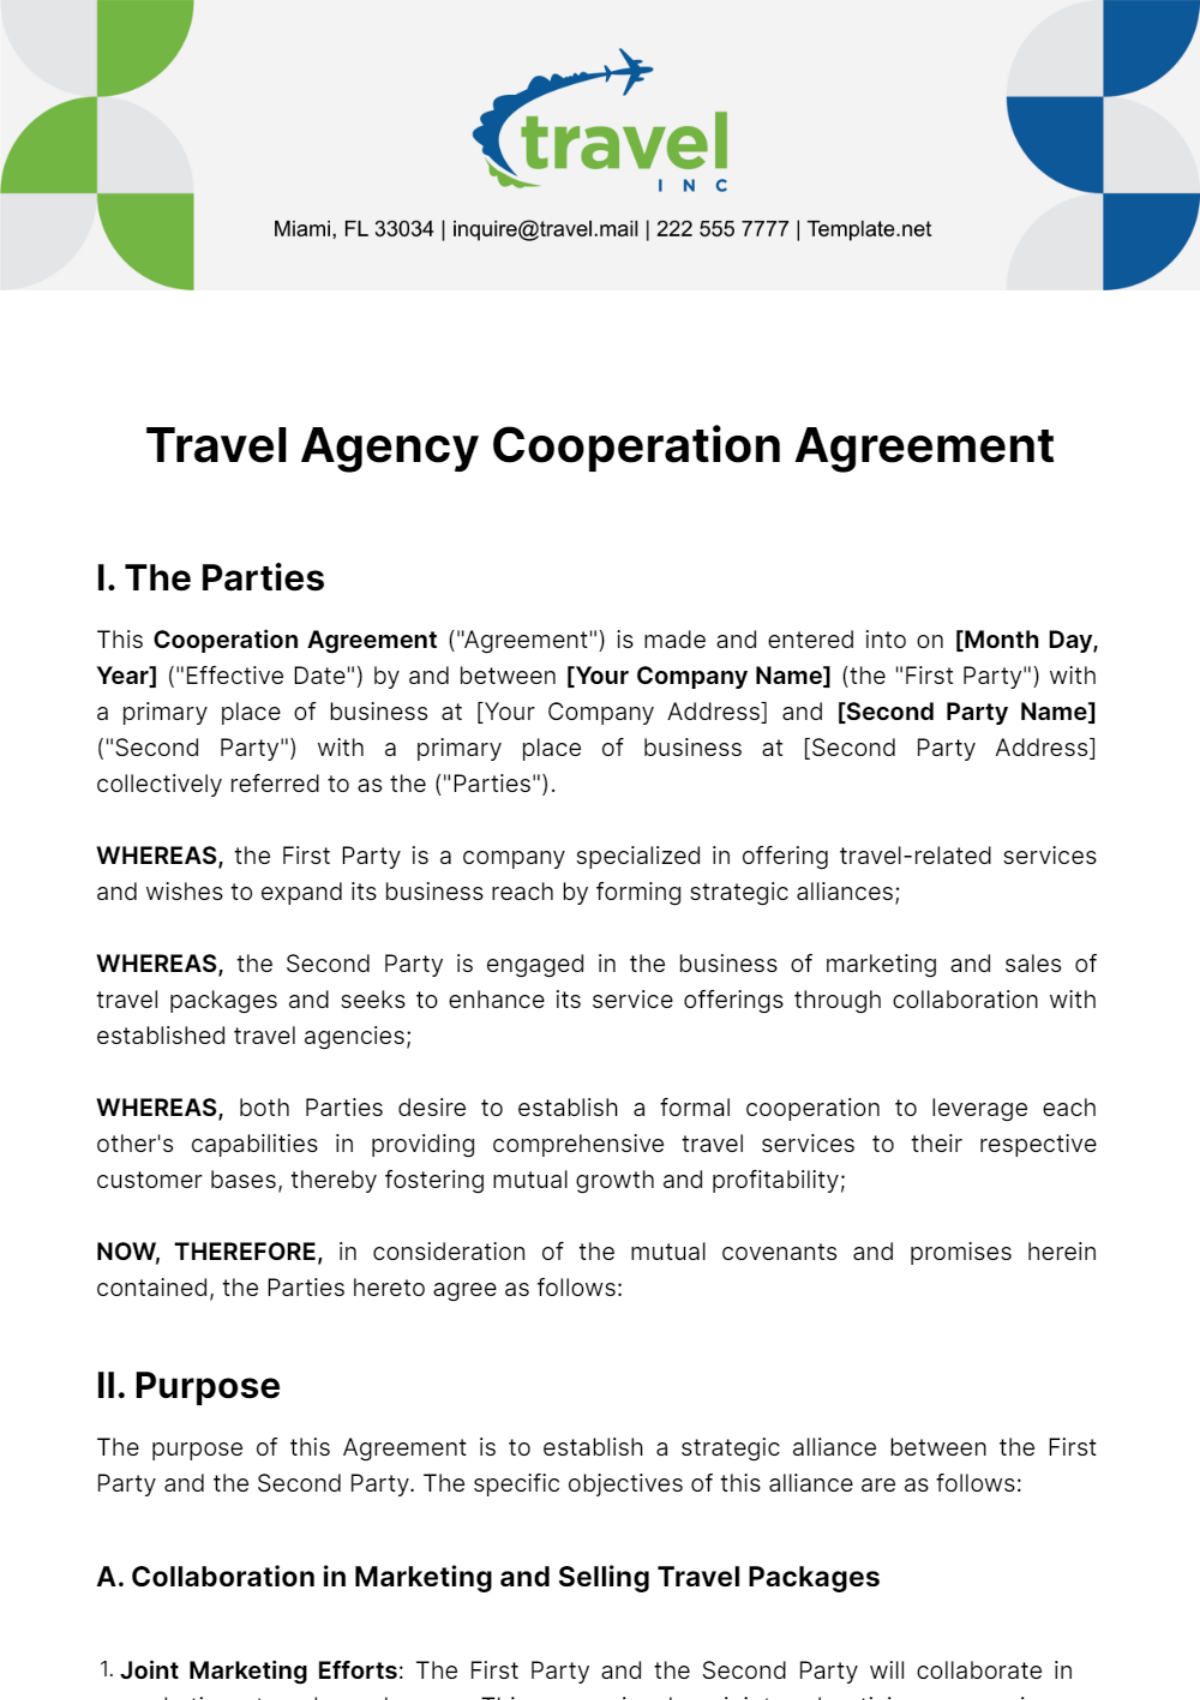 Free Travel Agency Cooperation Agreement Template